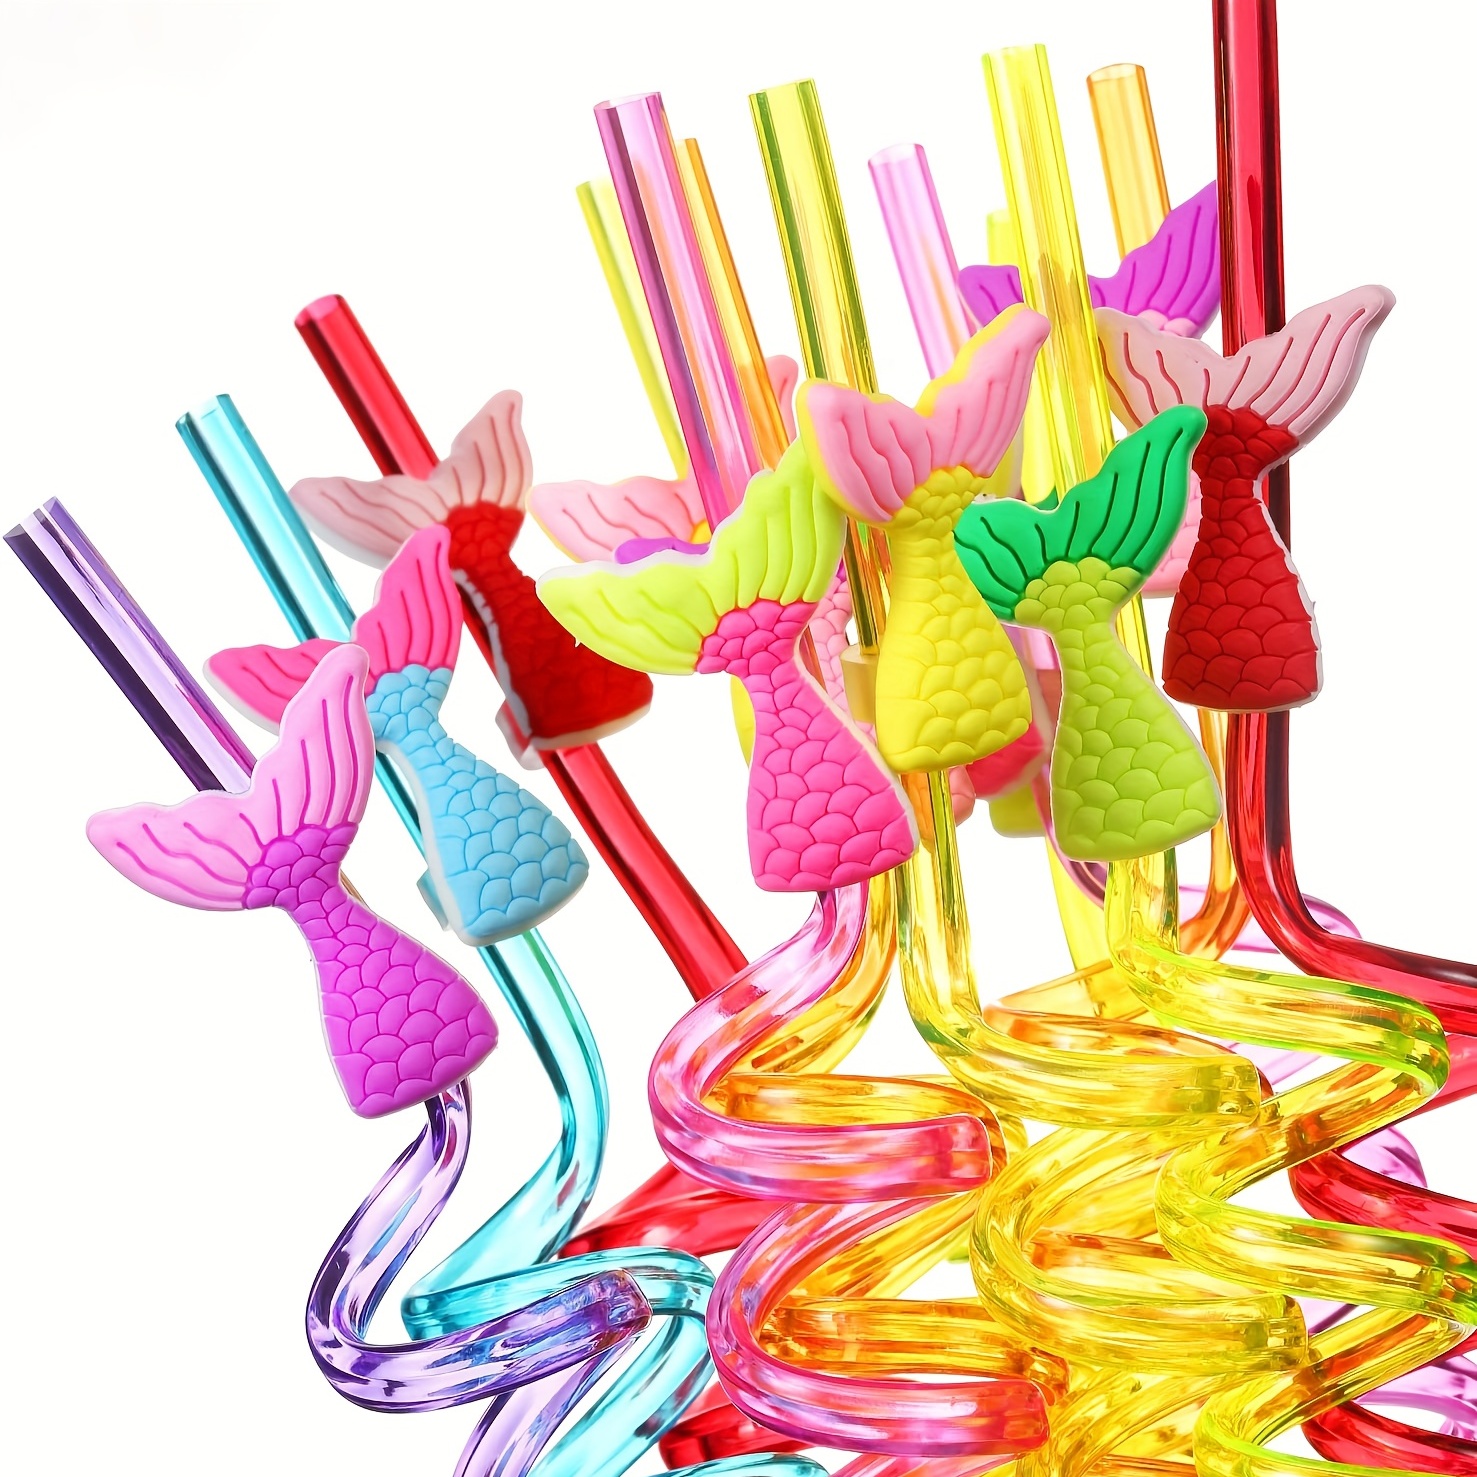 24pcs Straw, Mermaid Straw With Brush, Reusable Straw For Milk Water  Drinking, Straws For Family Gatherings, Birthday Parties, Themed Parties,  Decorat